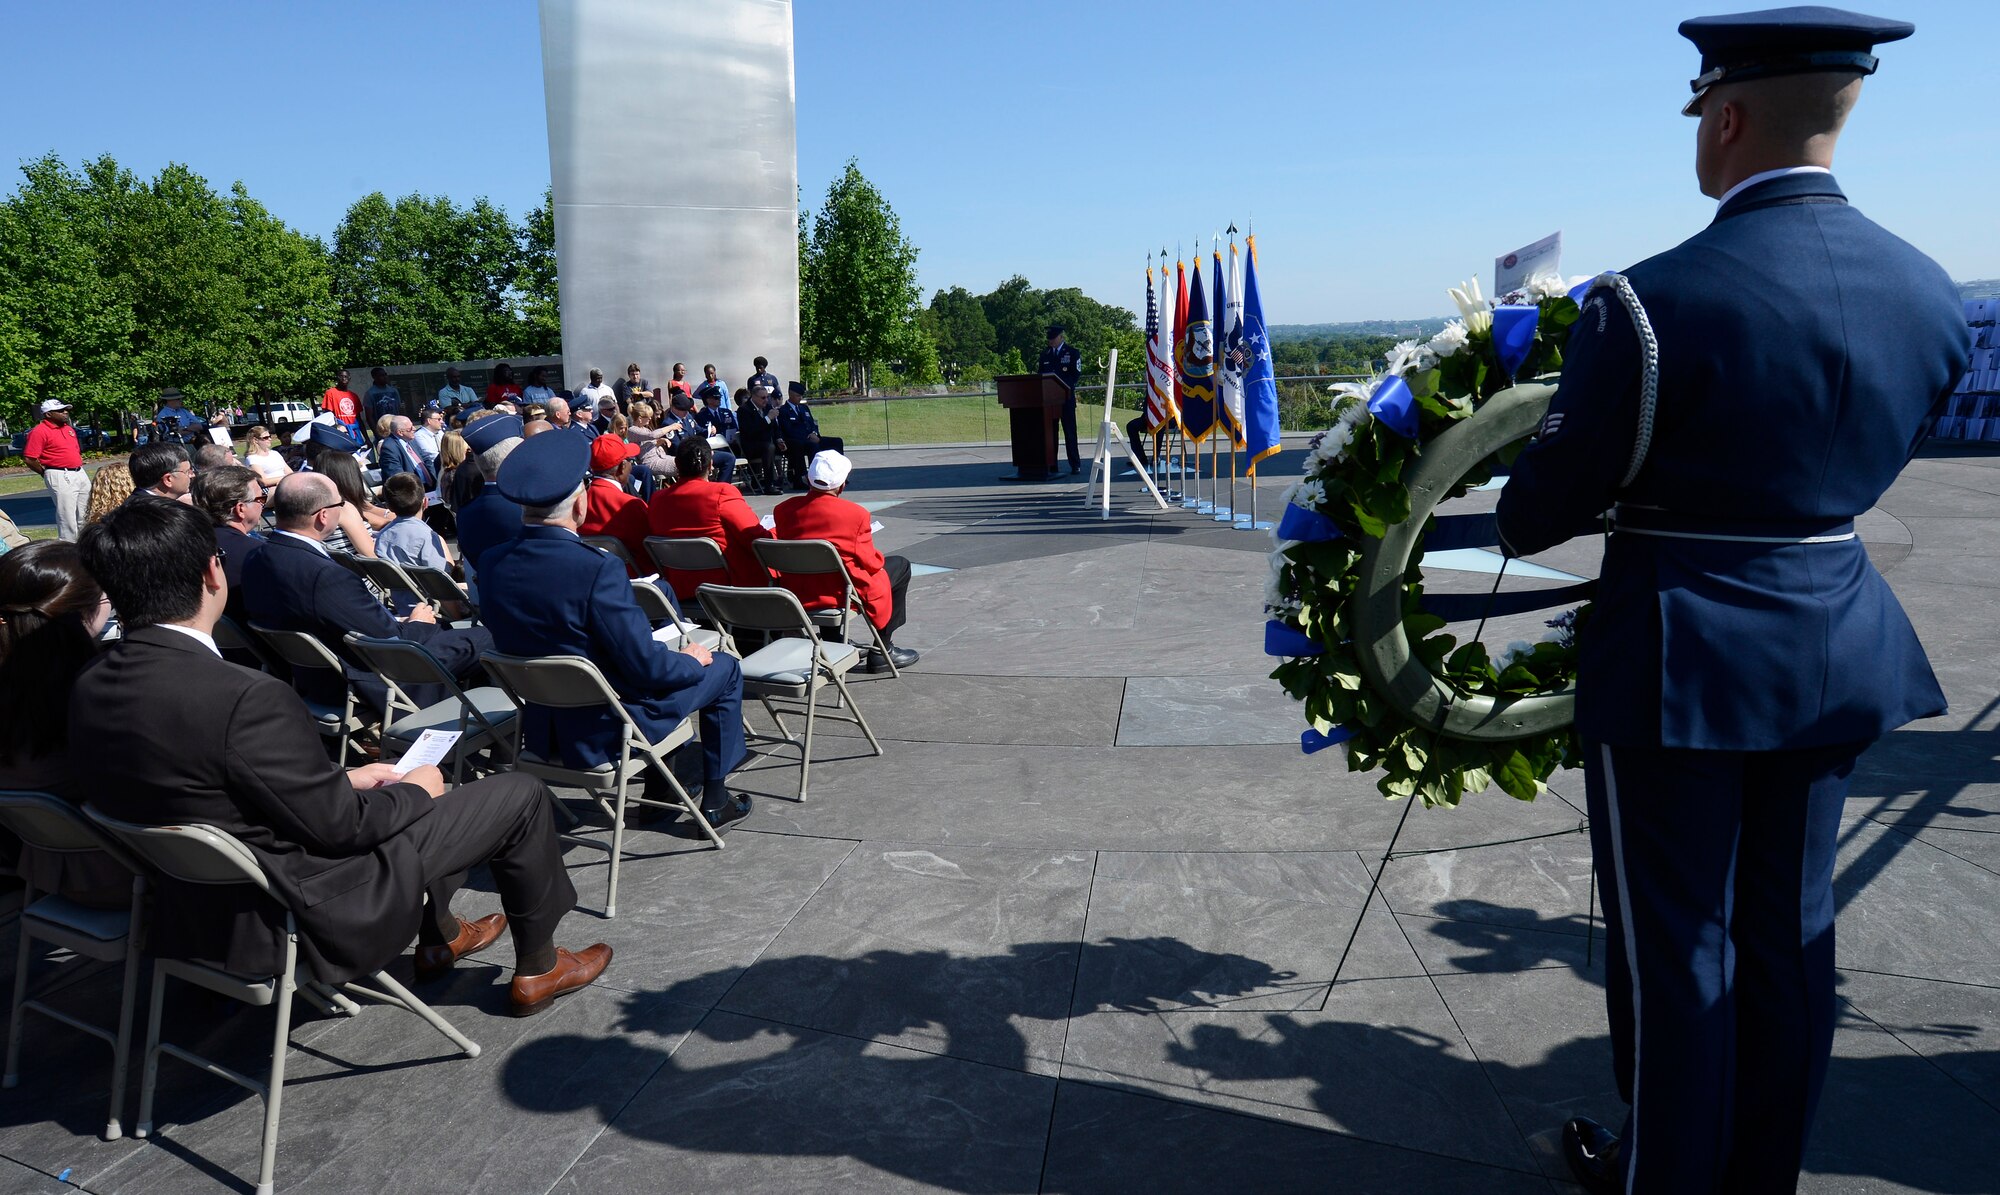 Chief Master Sgt. of the Air Force James A. Cody holds his keynote speech during a Memorial Day wreath-laying ceremony May 26, 2014, at the Air Force Memorial, Arlington, Va. Cody remarked that on Memorial Day the three spires of the memorial remind him of the trifecta of freedom, fortitude and our fallen. Cody said that we all enjoy freedom because of the fortitude shown by of our fallen comrades in fighting and standing their ground. (U.S. Air Force photo/Jim Varhegyi)